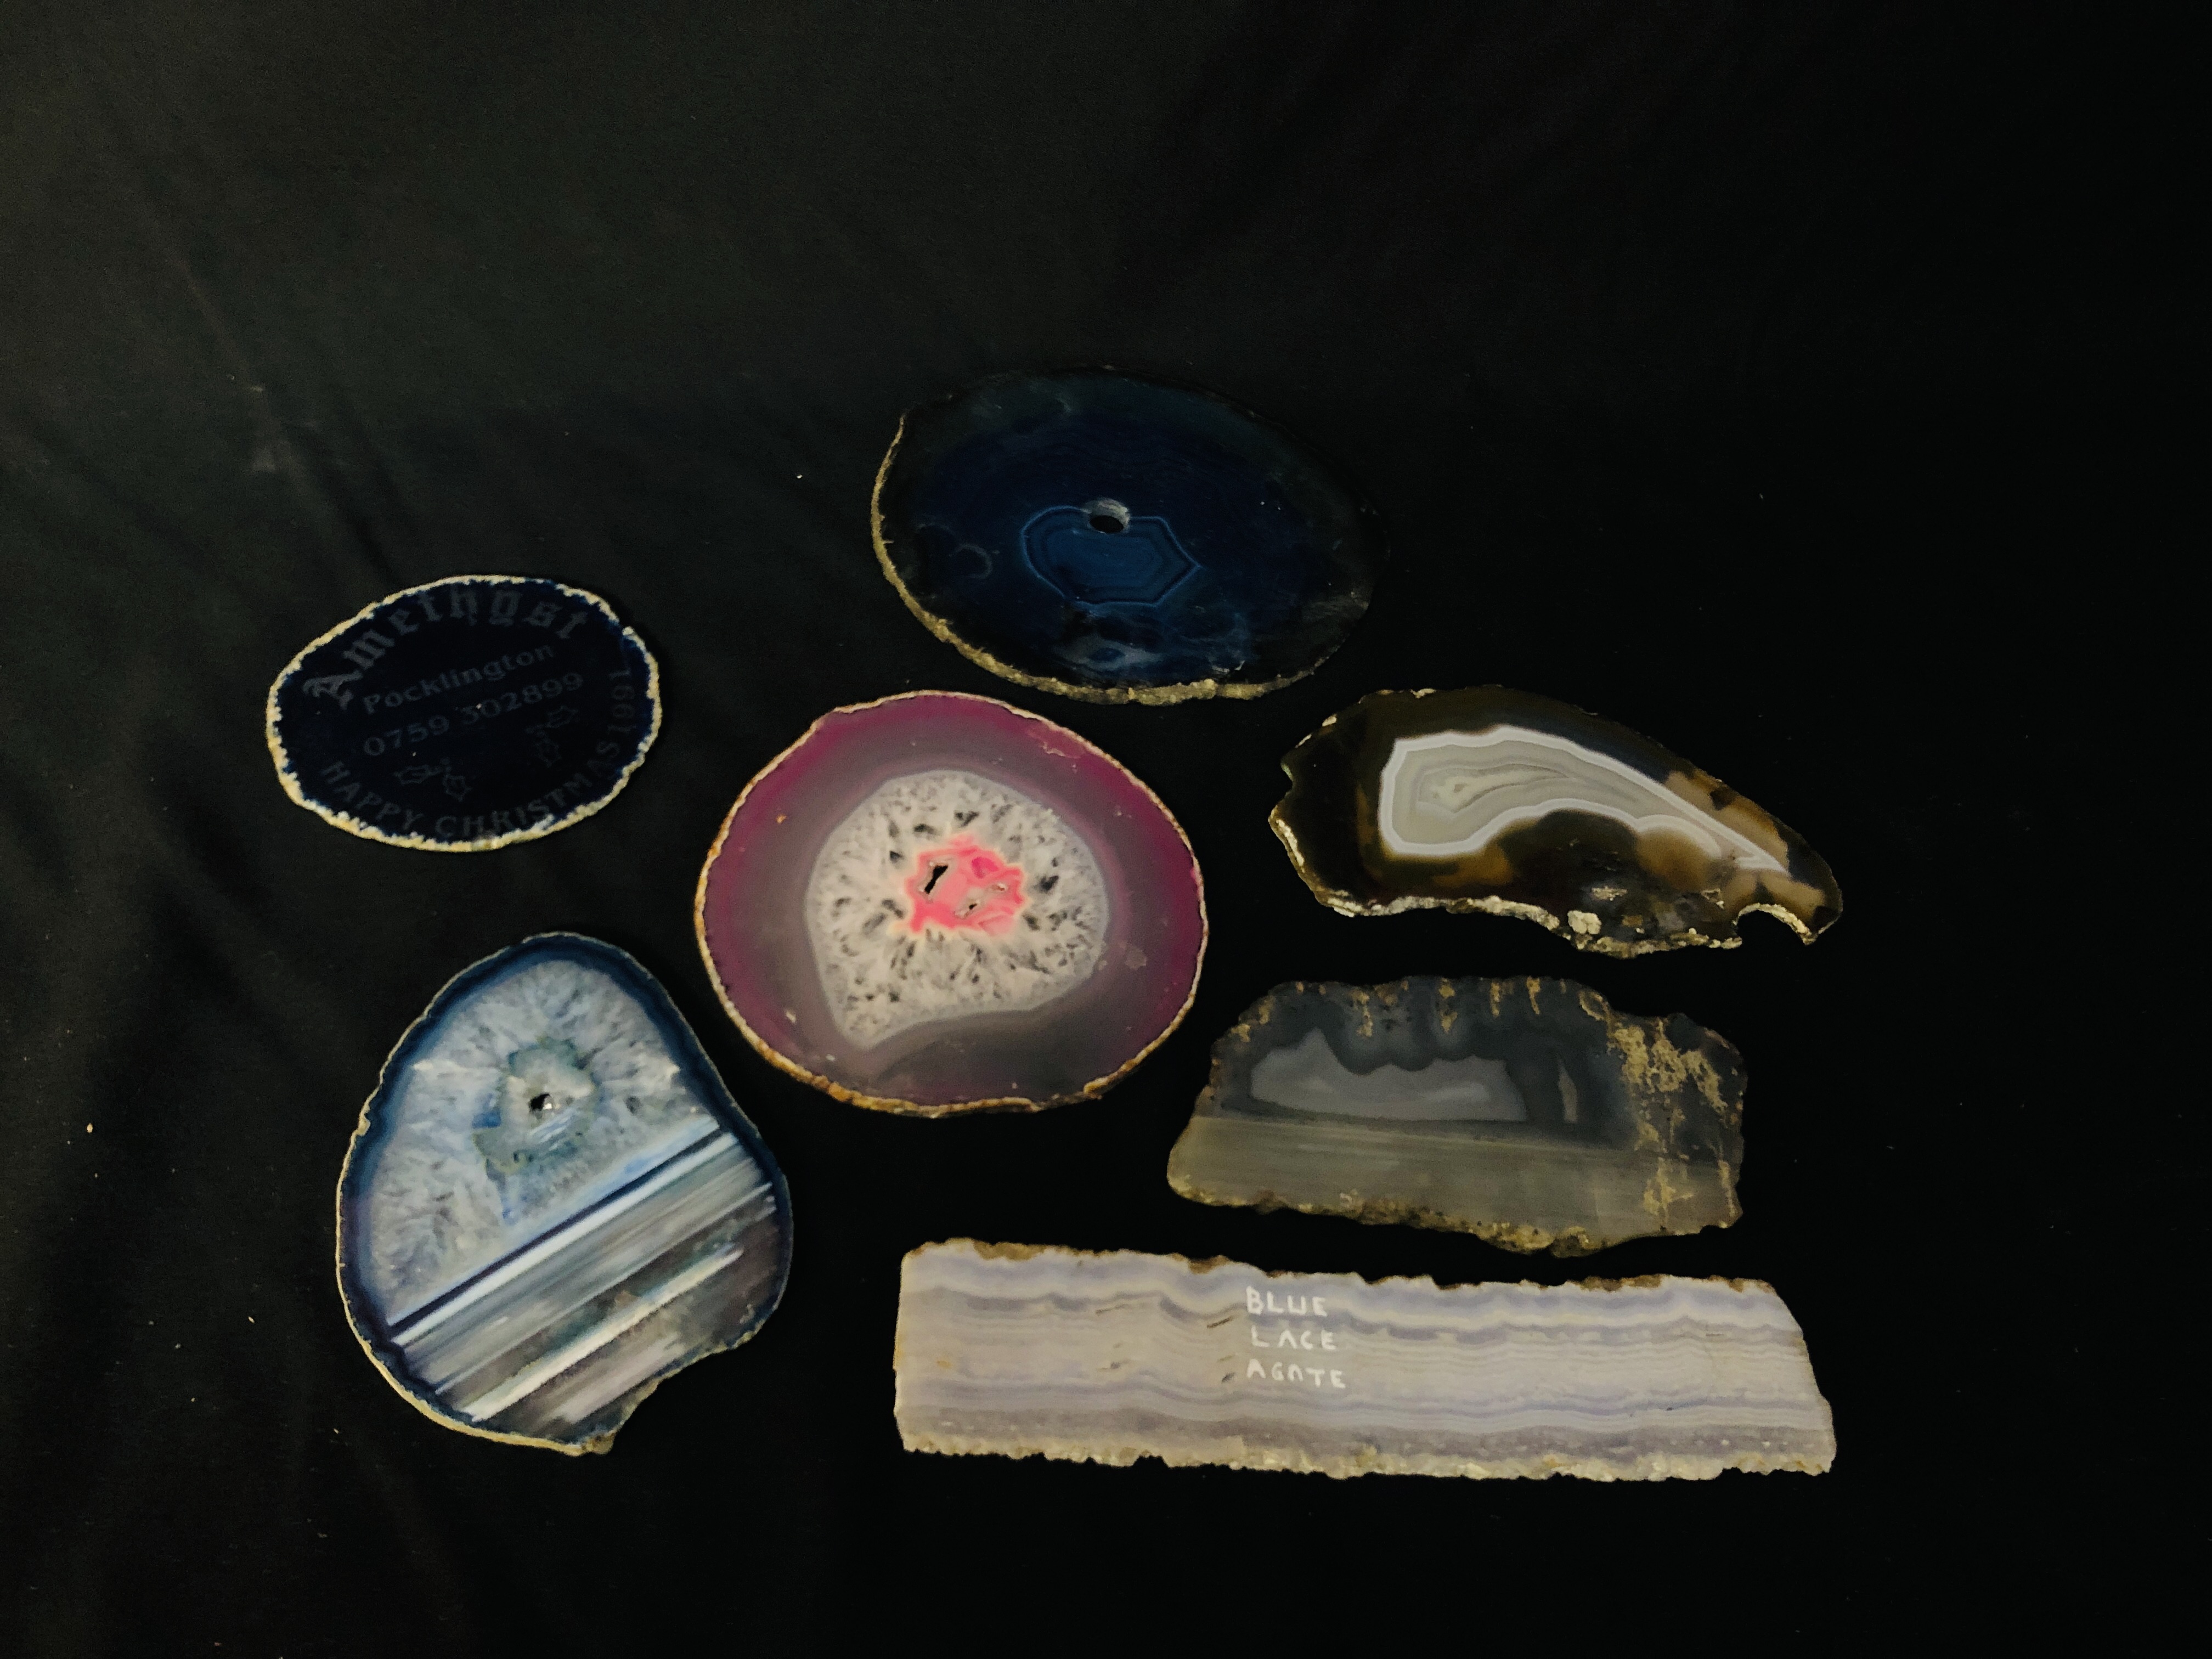 A COLLECTION OF APPROX 7 POLISHED AGATE SLICES TO INCLUDE BLUE LACEETC.